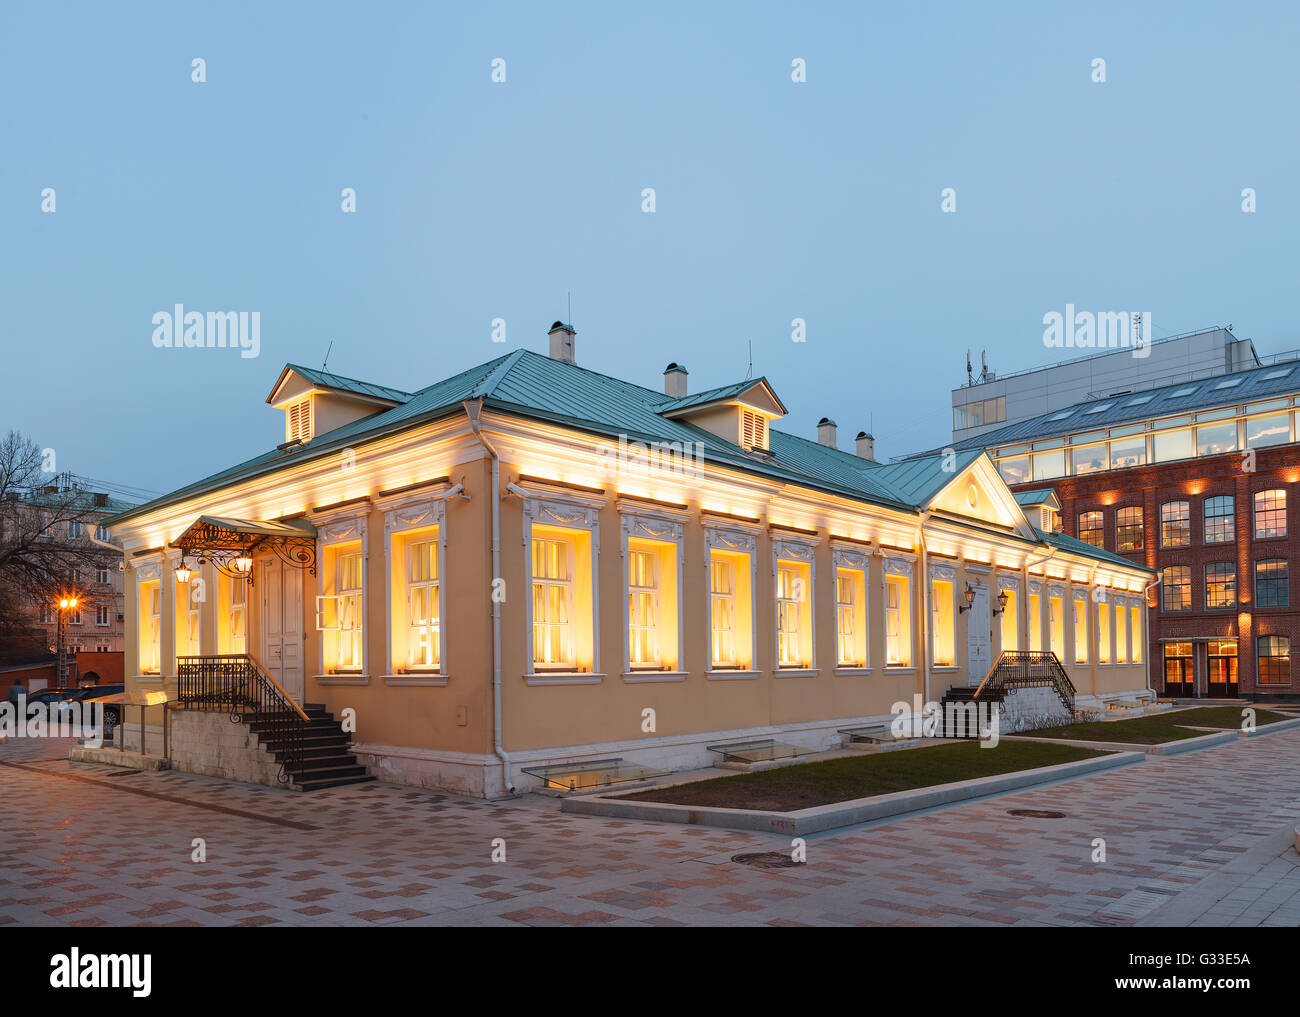 Luxury office building. Building in classical palladio style. Stock Photo